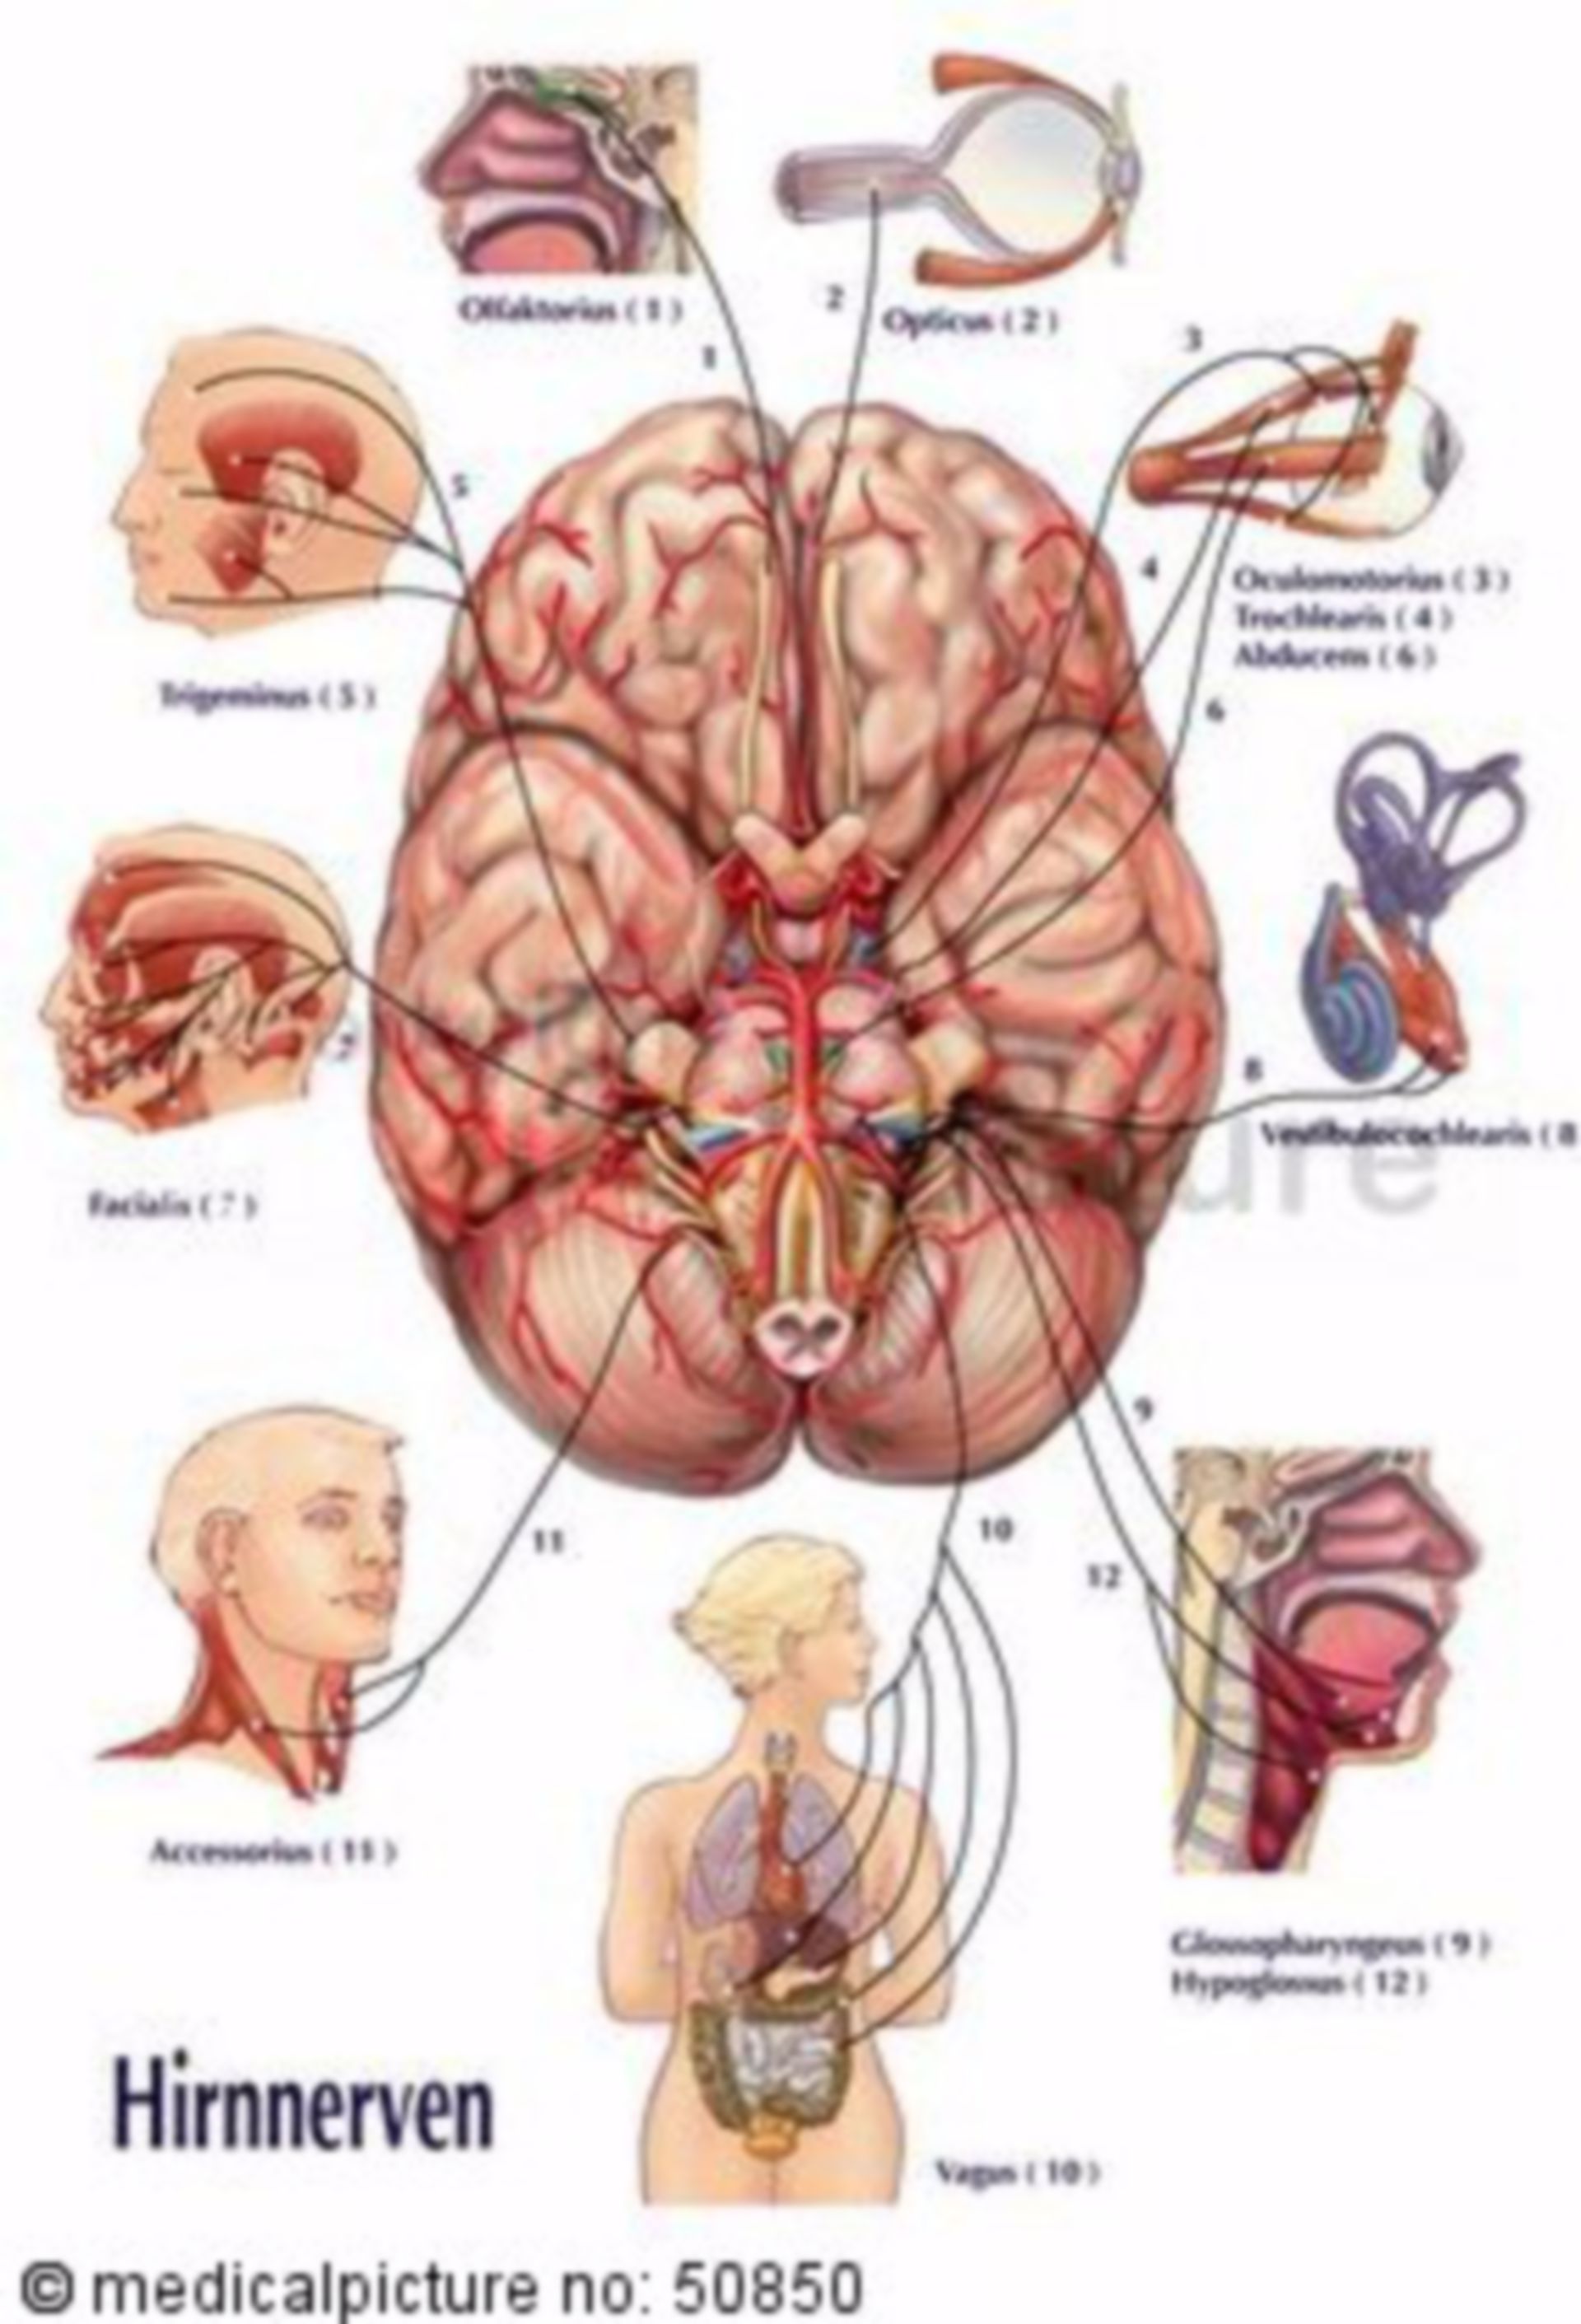 Cranial nerves and their supply areas